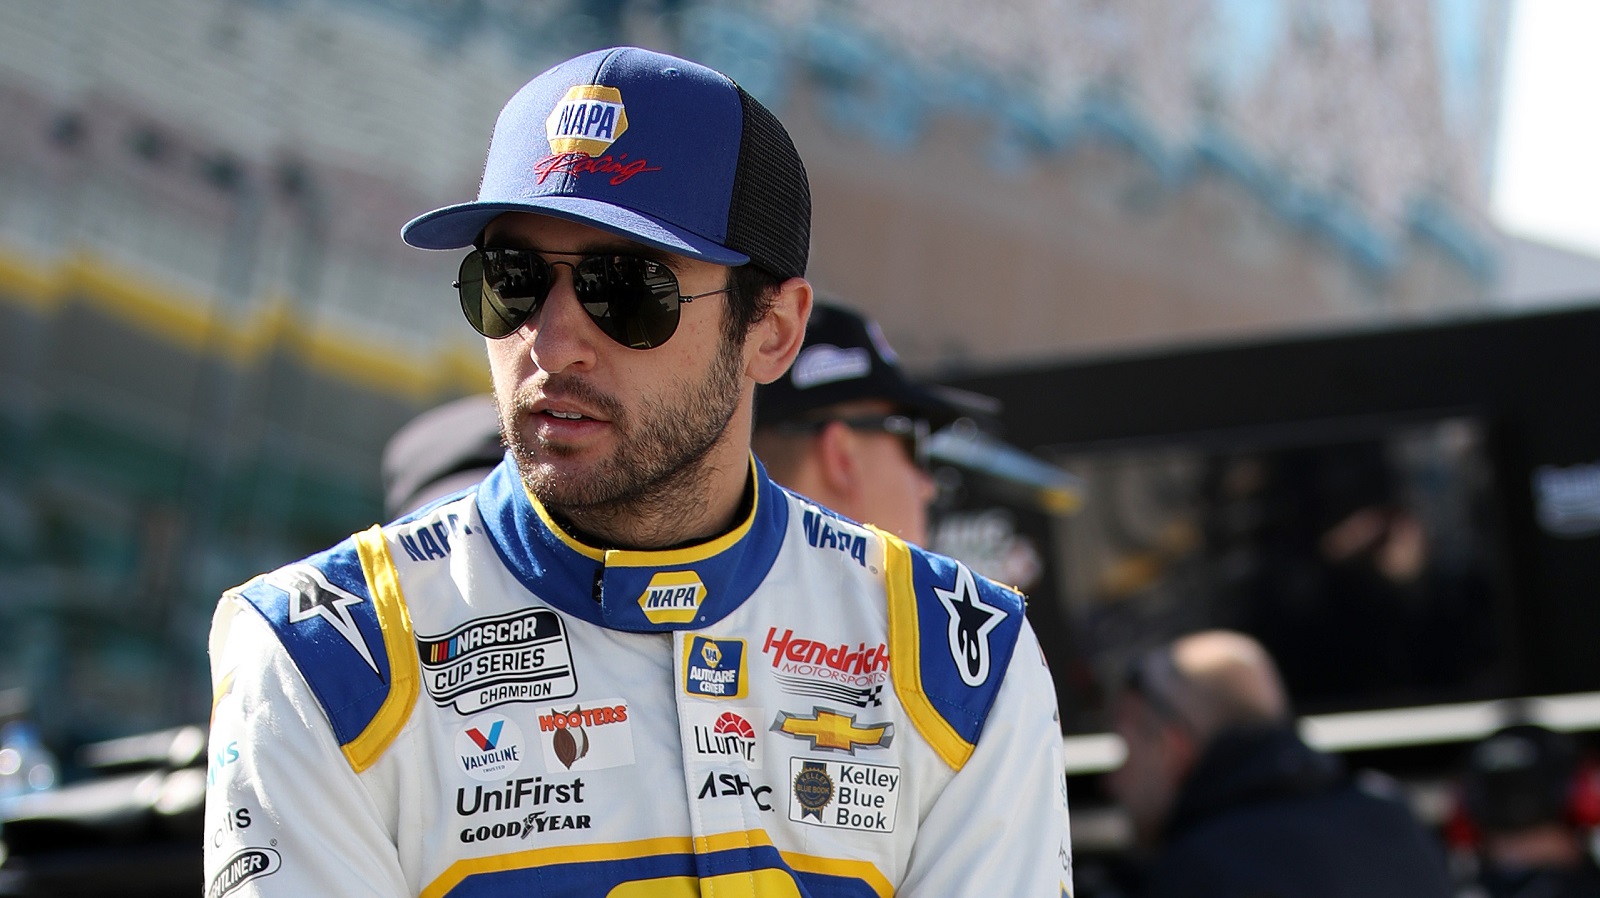 Chase Elliott talks on the grid during practice for the NASCAR Cup Series Pennzoil 400 at Las Vegas Motor Speedway on March 5, 2022.